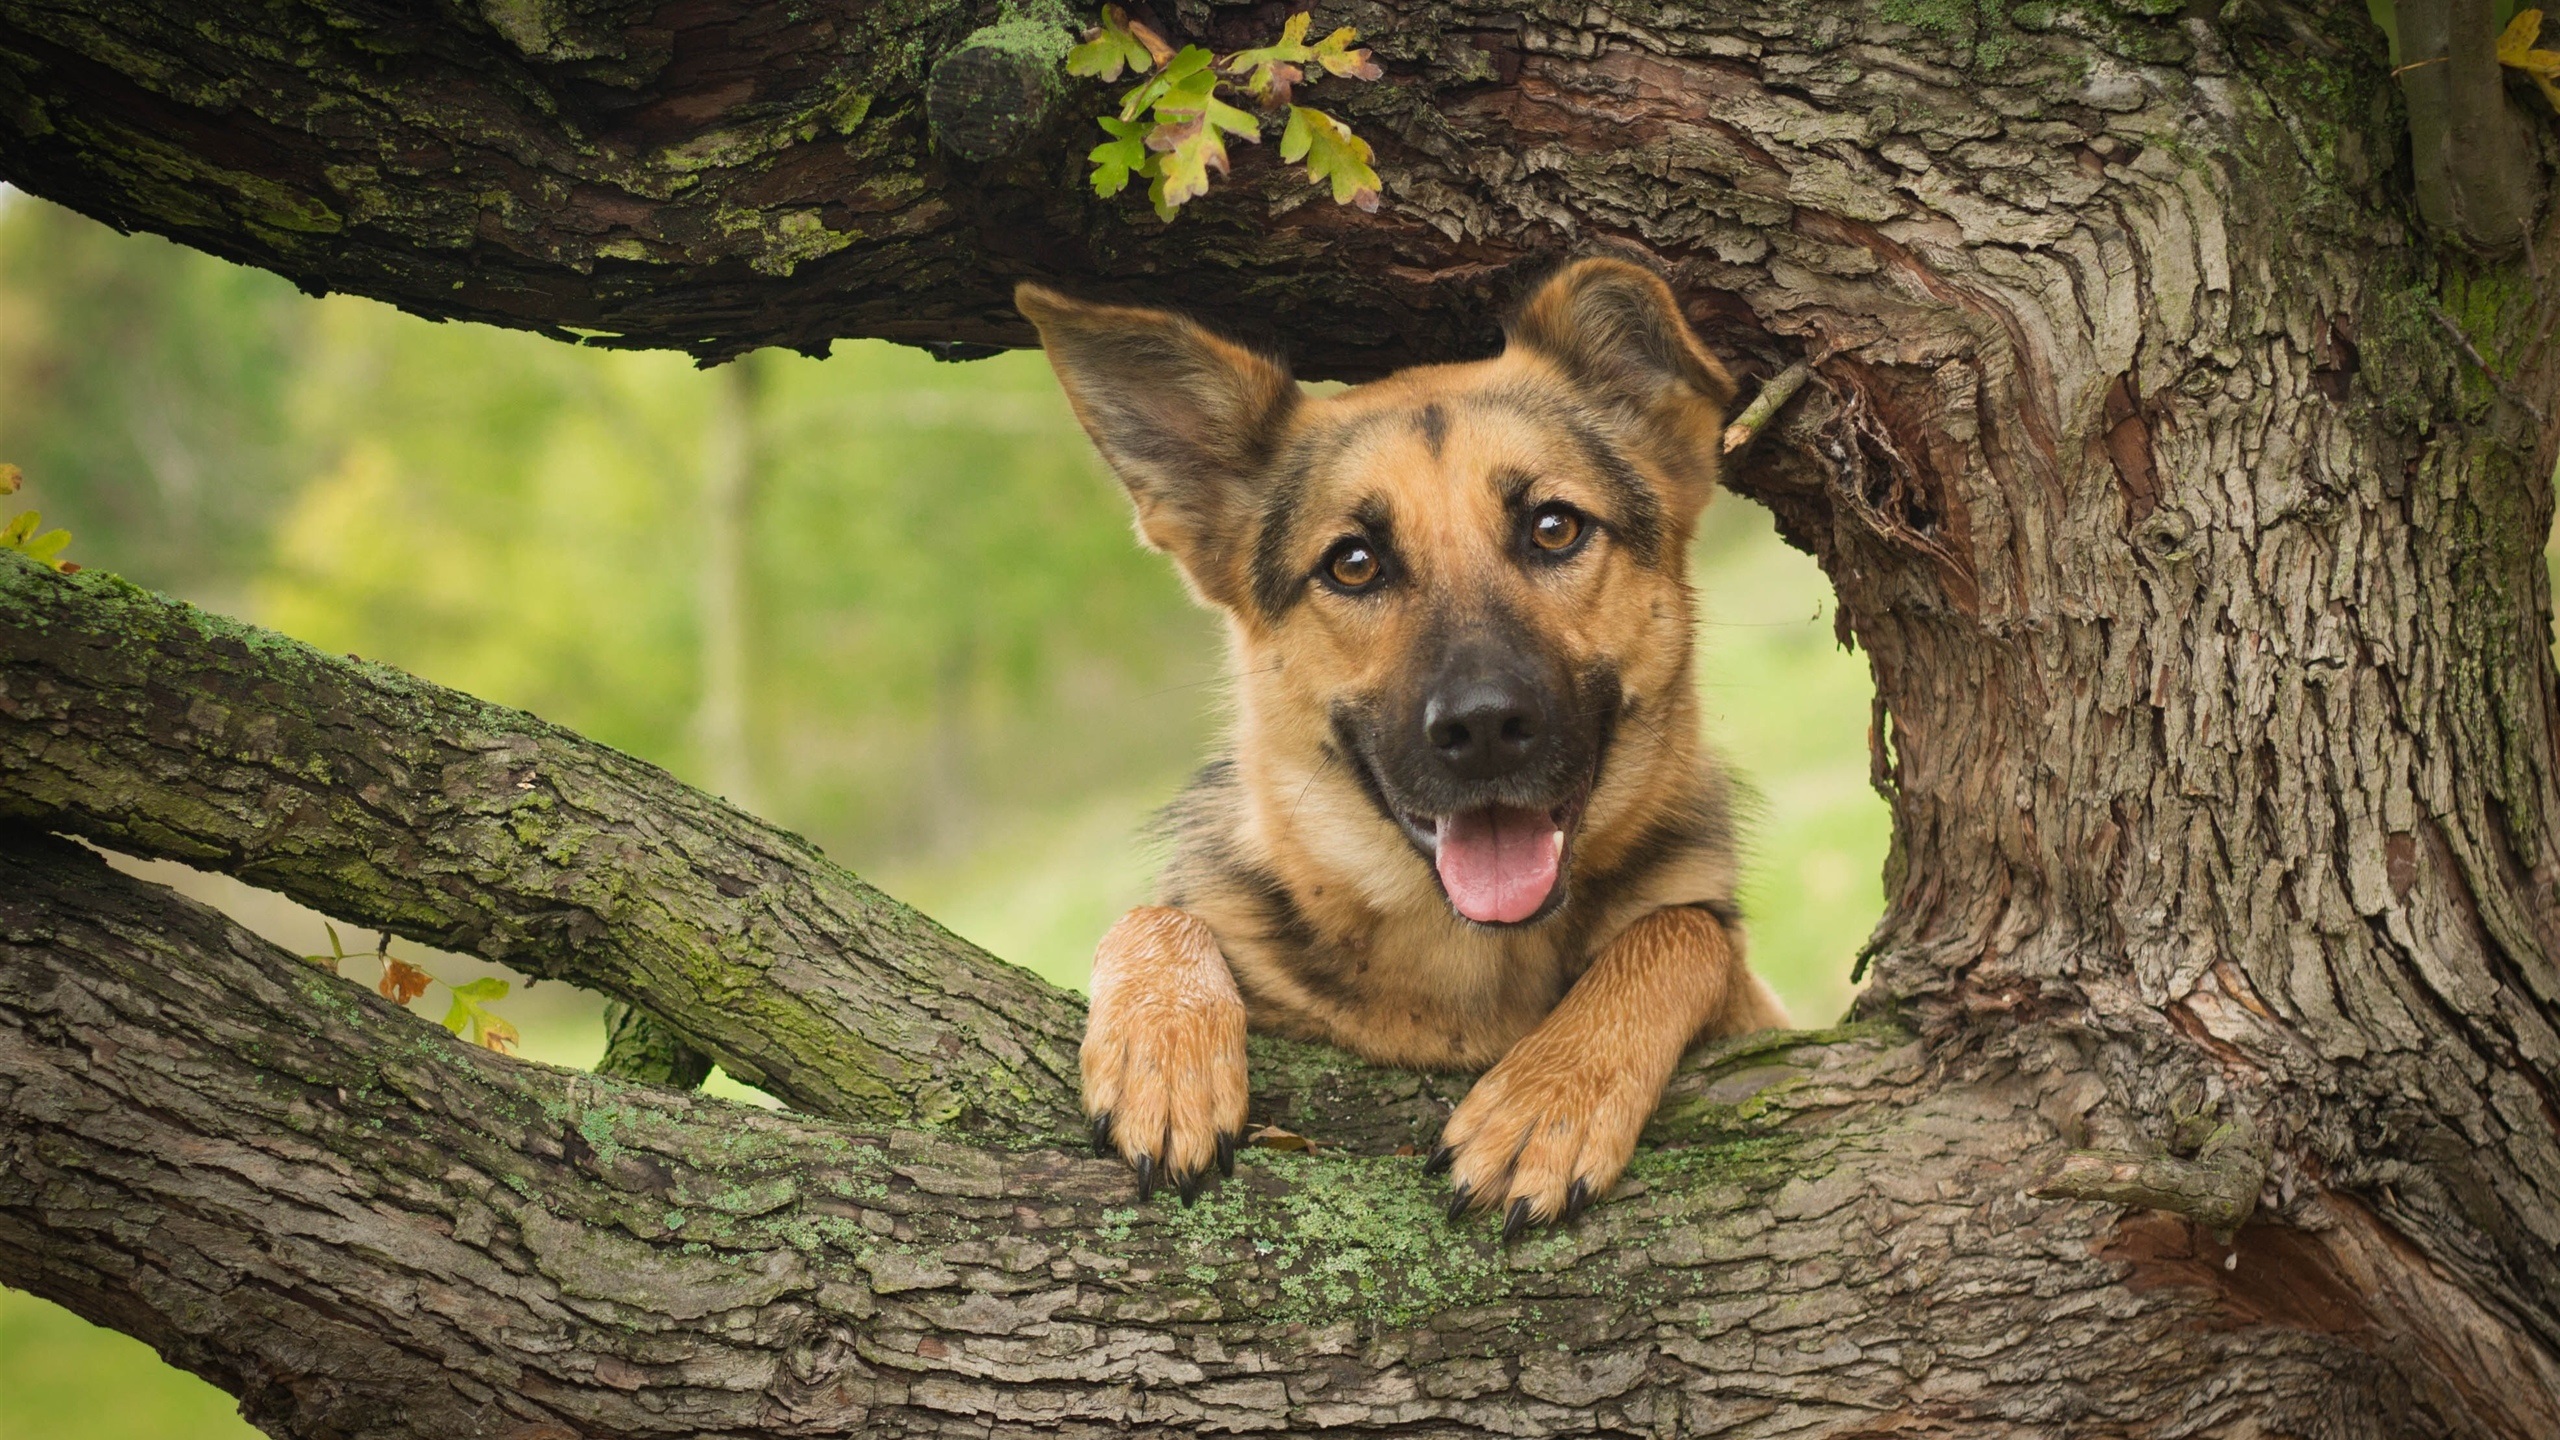 General 2560x1440 German Shepherd dog animals branch trees nature plants photography frontal view